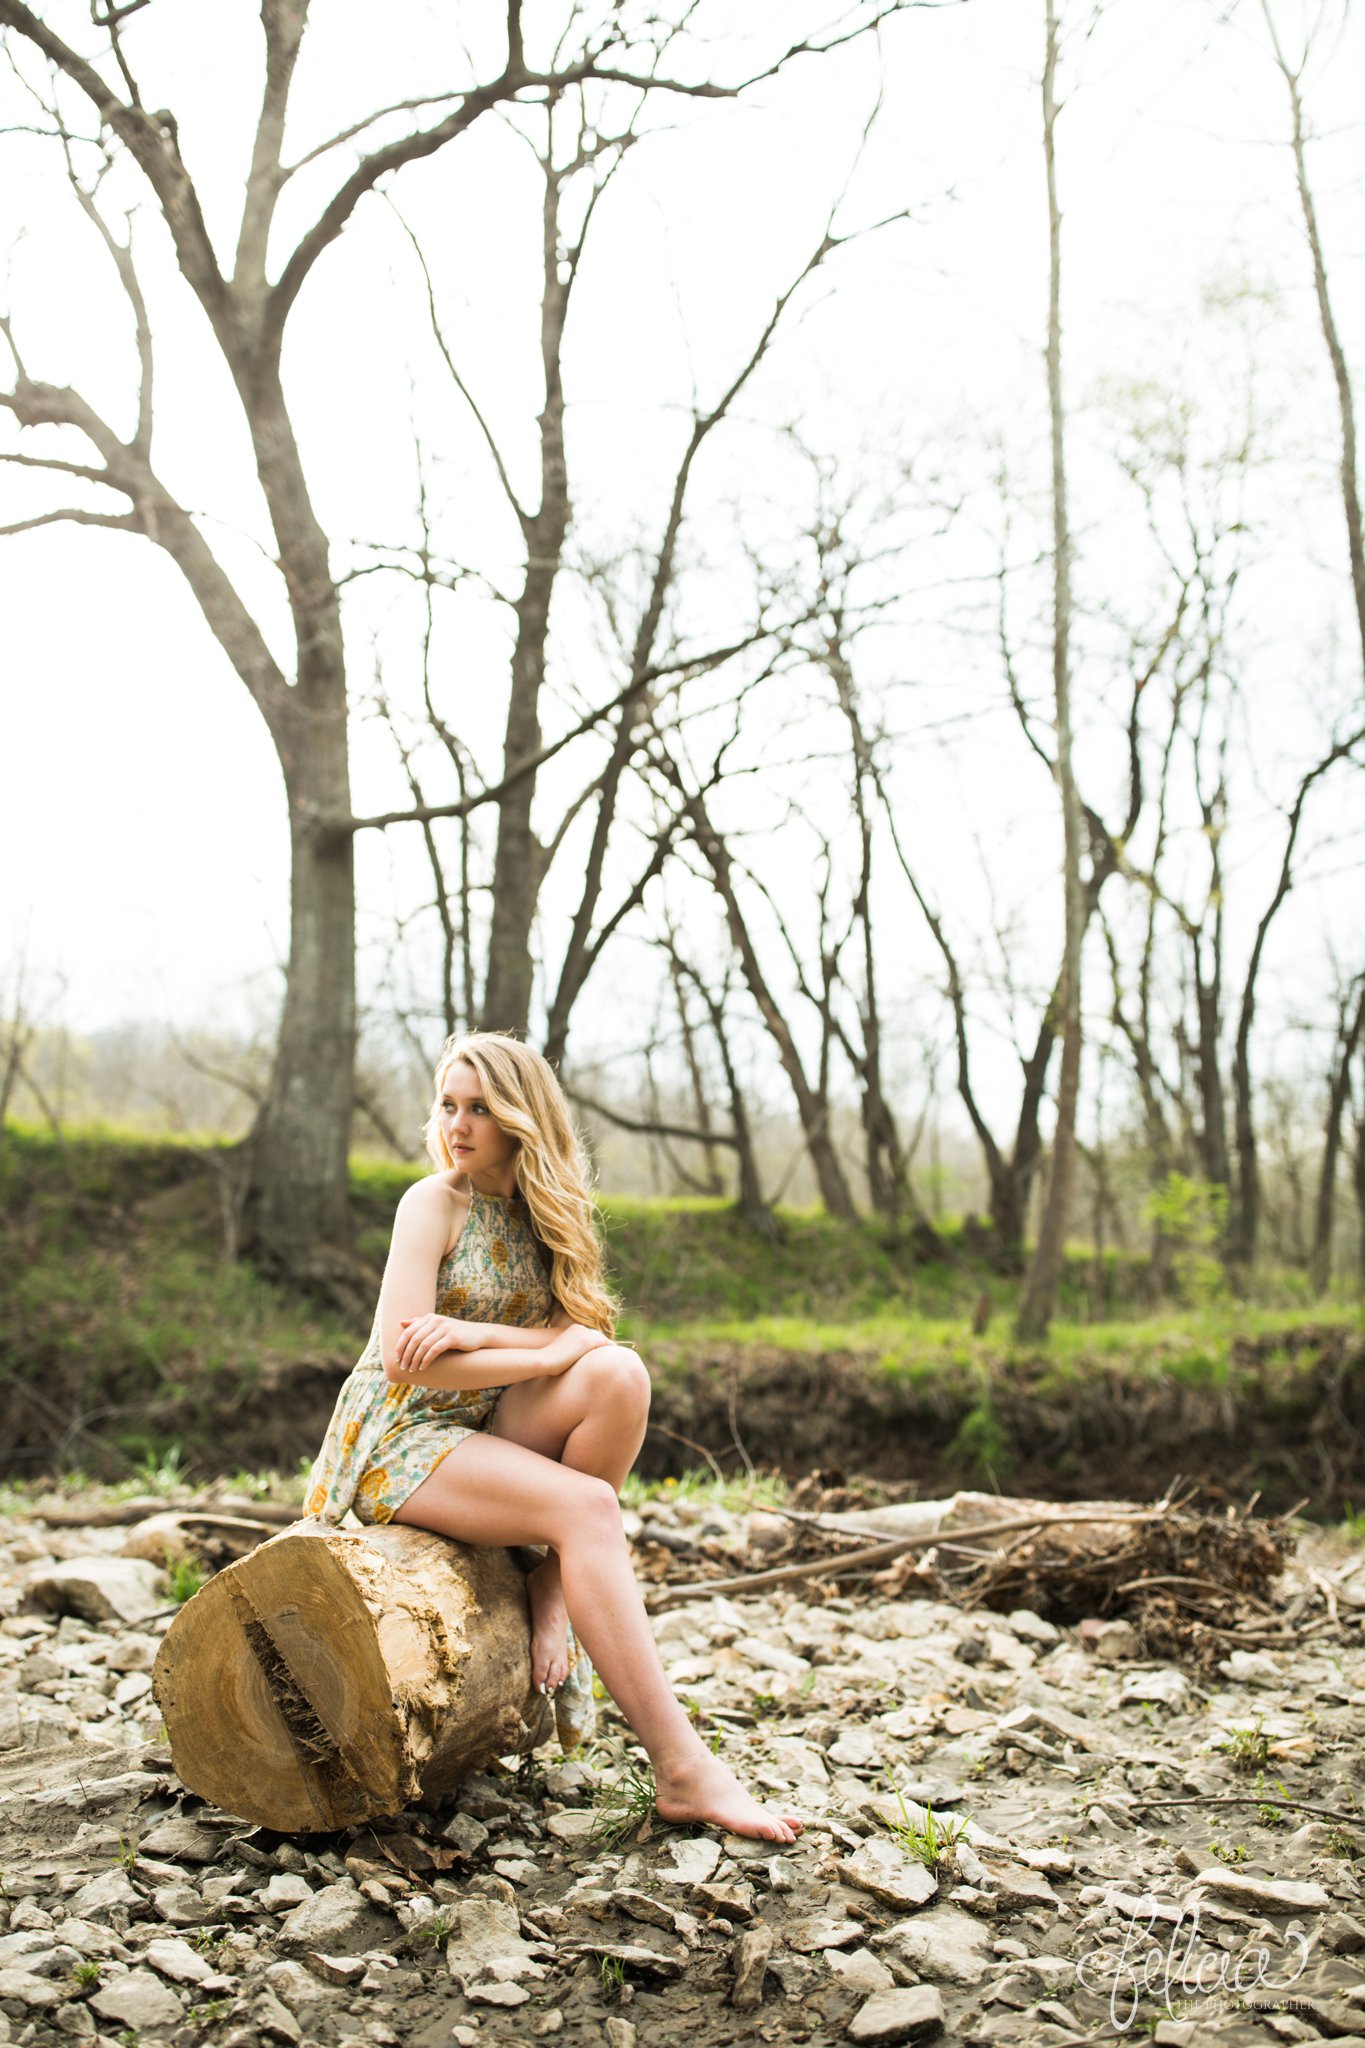 senior pictures | images by feliciathephotographer.com | Kansas City | rustic | long blonde hair | nature background | trees | flower print dress | yellow dress | elegant | dramatic | candid | rocky background | sitting on tree log